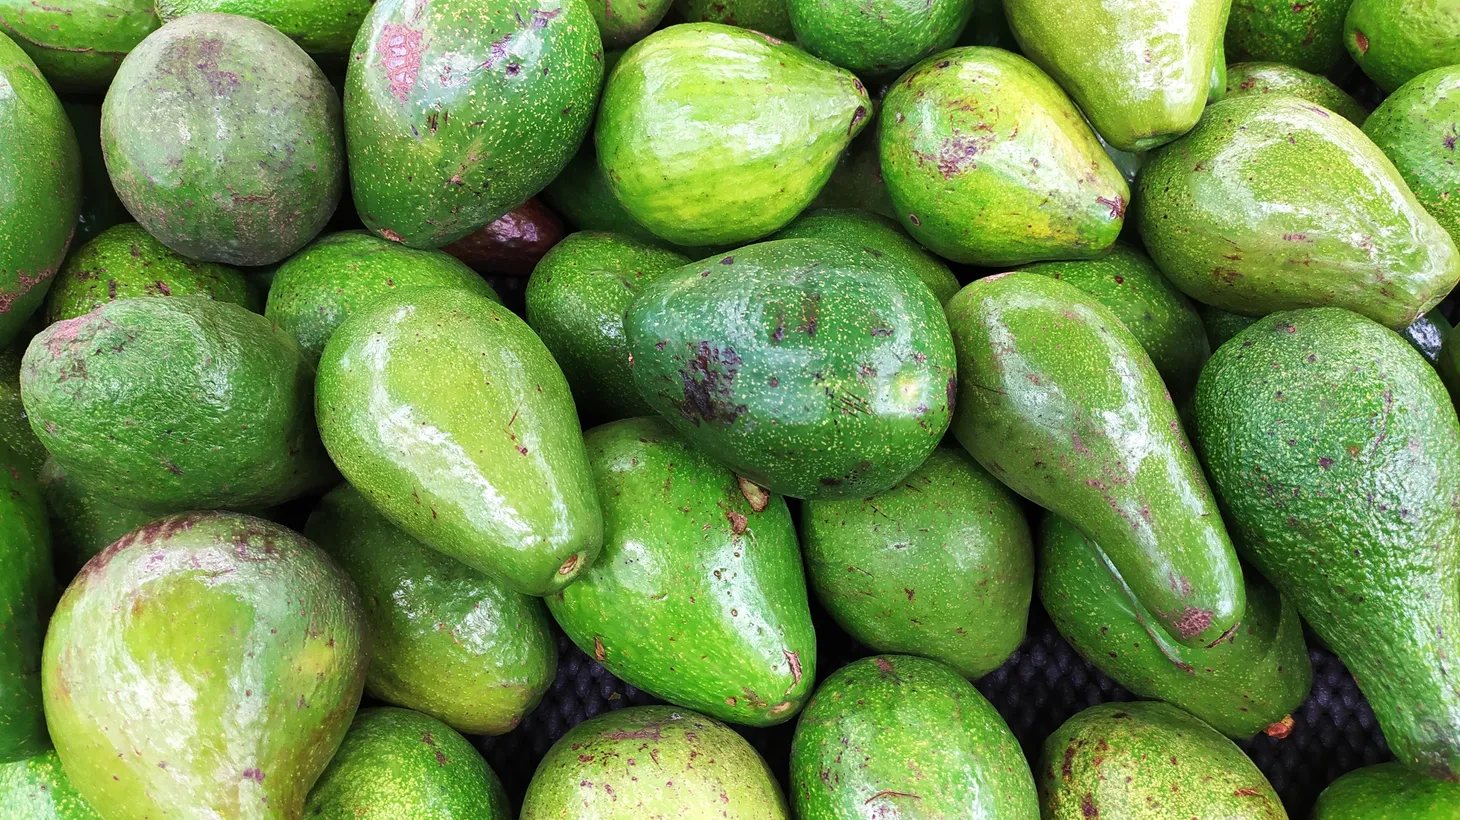 The U.S. usually takes a massive amount of avocados from Mexico. Now with the temporary ban, what will happen to them? “I would imagine a lot of them could just be rotting, whether that’s out in the fields at the actual farm level, or on a truck waiting at the border, or in some distribution warehouse,” says reporter Leslie Patton.